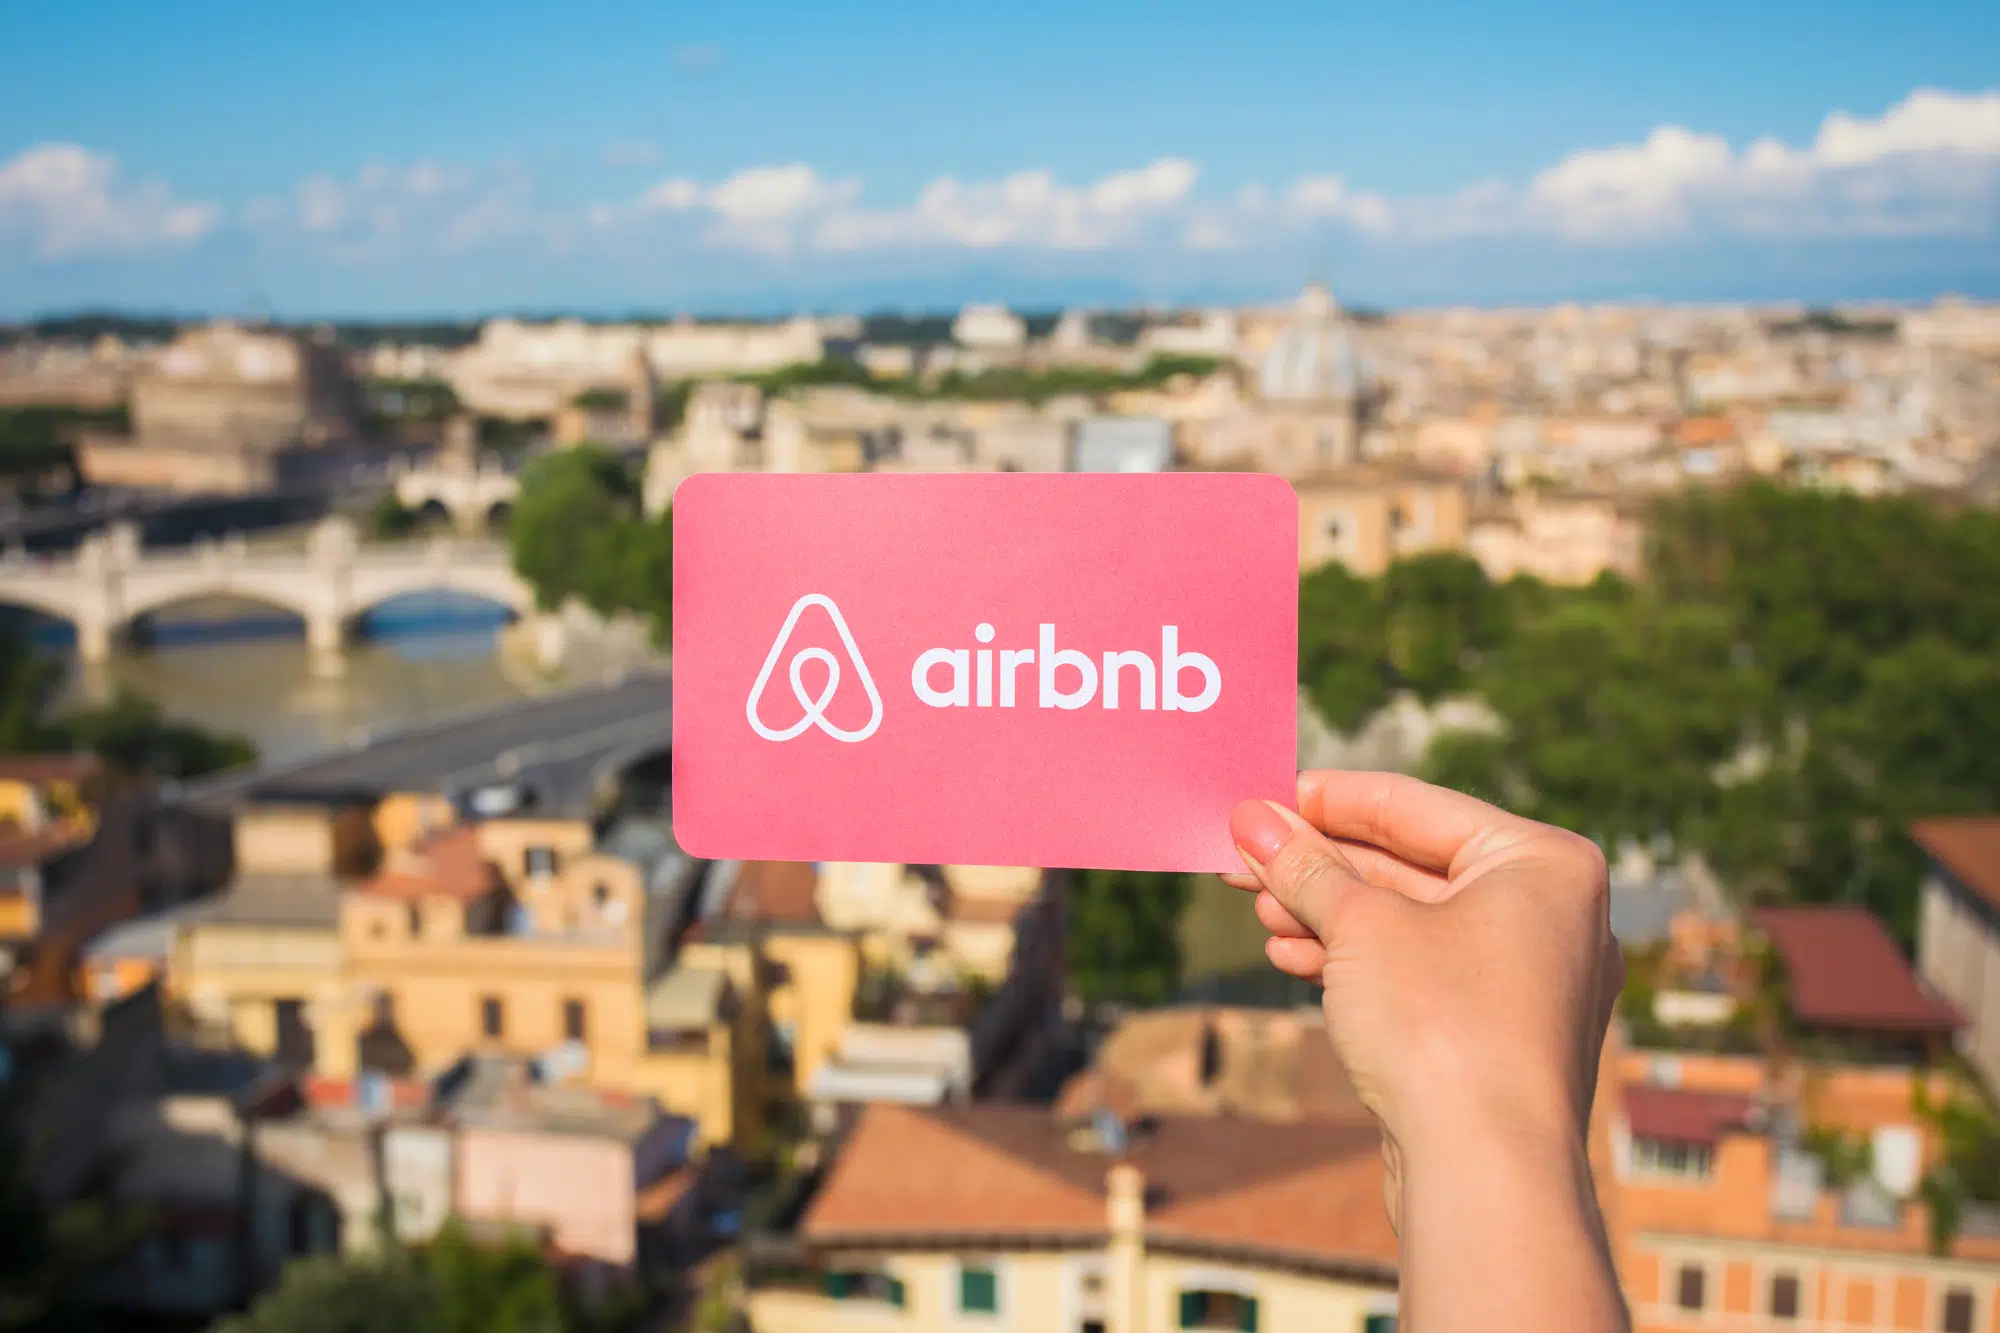 Rome, Italy - May 13, 2018: Person holding Airbnb logo in hand with city in background.